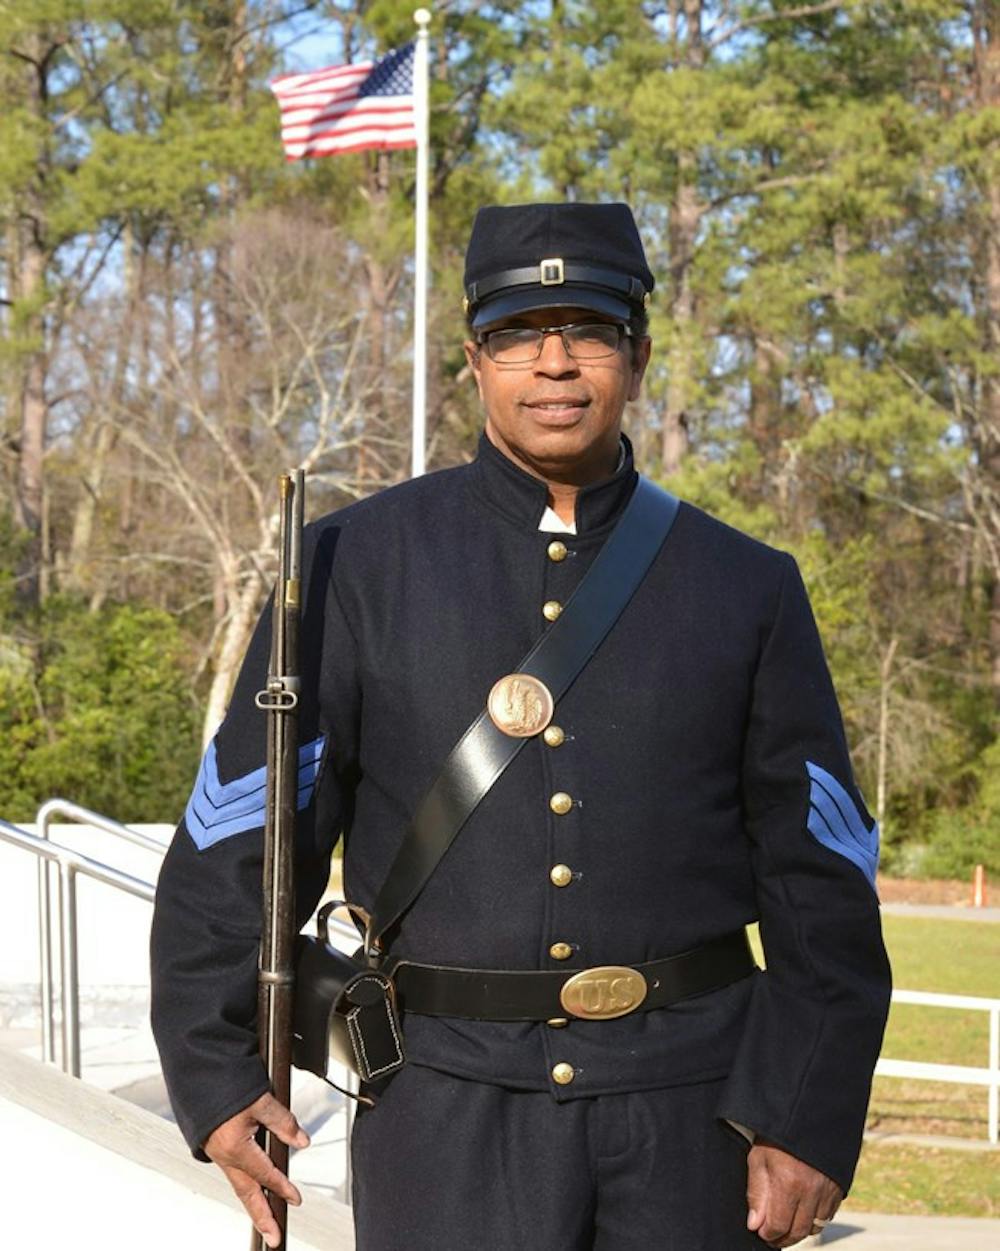 Park Ranger Lonnie Davis in Union uniform will lead a series of four Saturday presentations at Ocmulgee National Monument discussing the Georgia African Brigade during the Civil War.